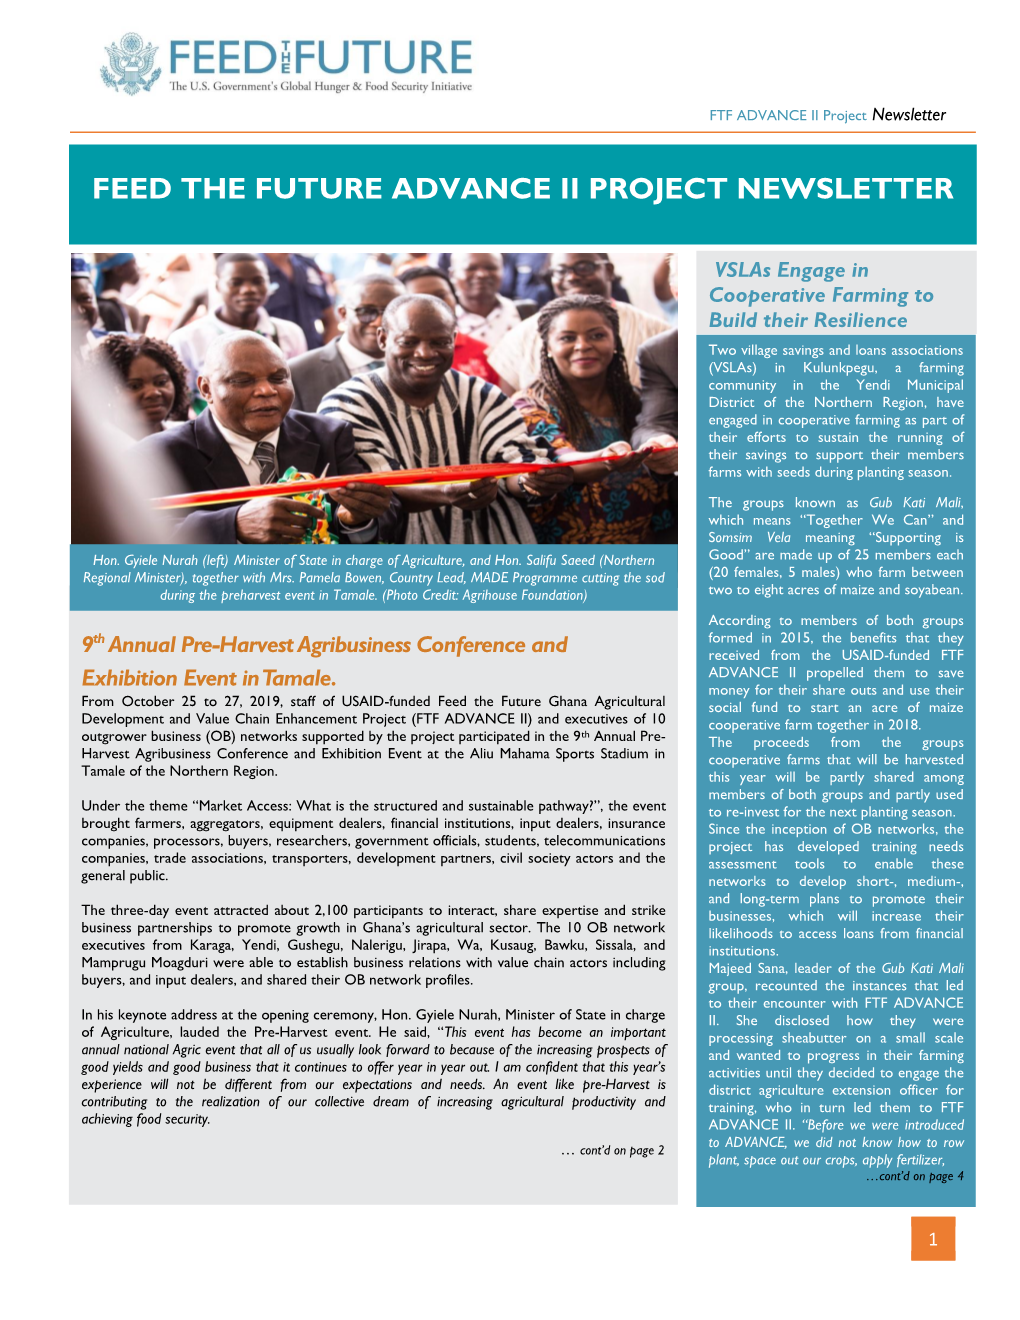 Feed the Future Advance Ii Project Newsletter